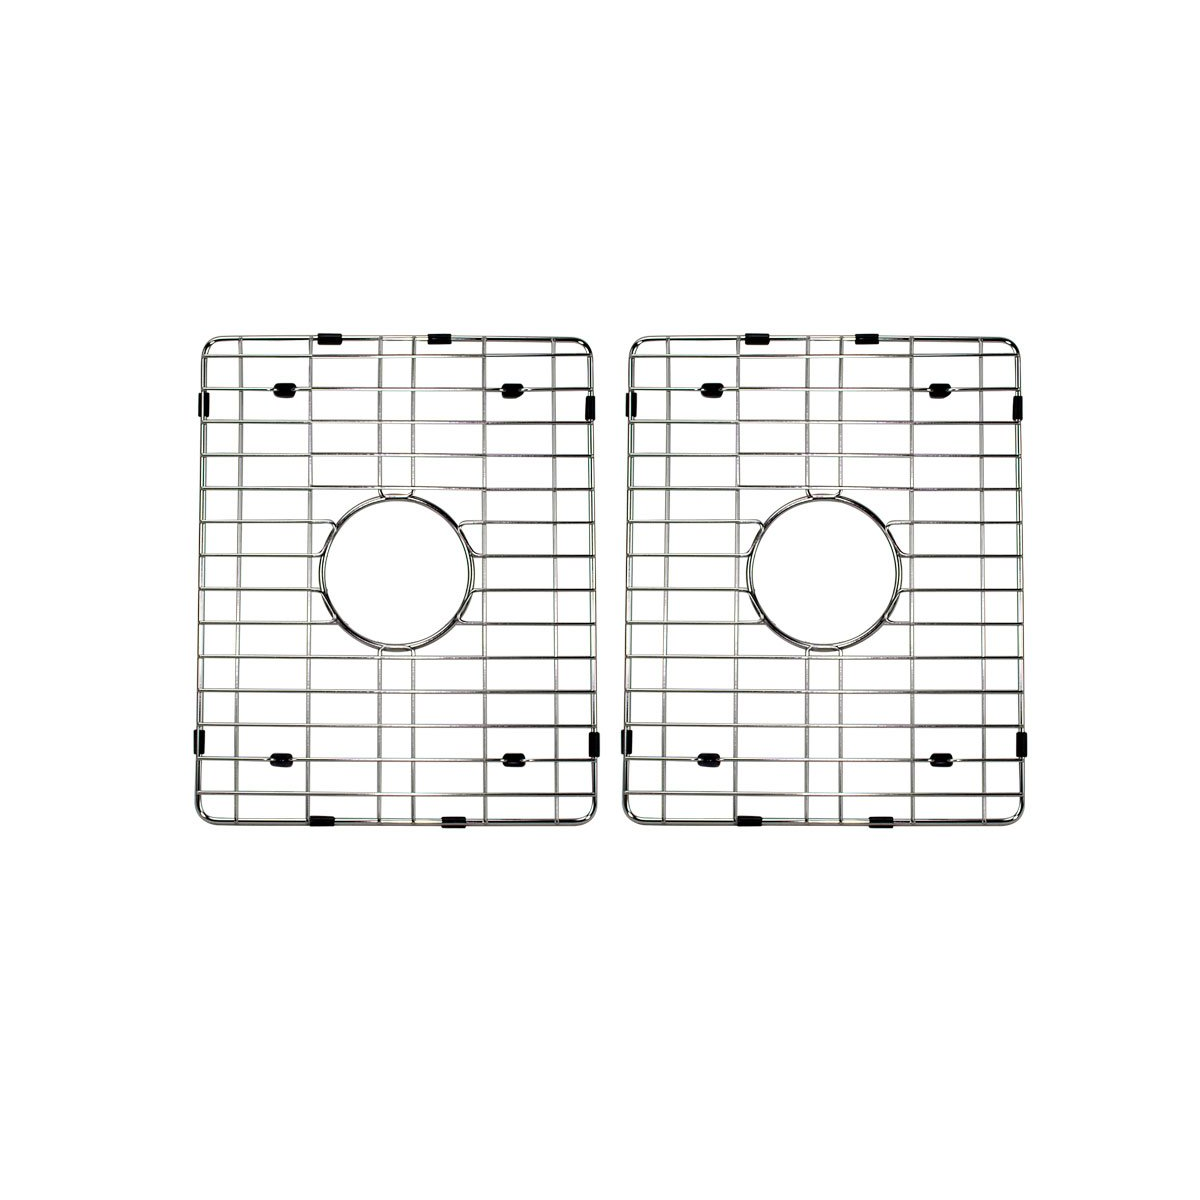 Pelican Int'l PL-VR5050 Stainless Steel Bottom Grid